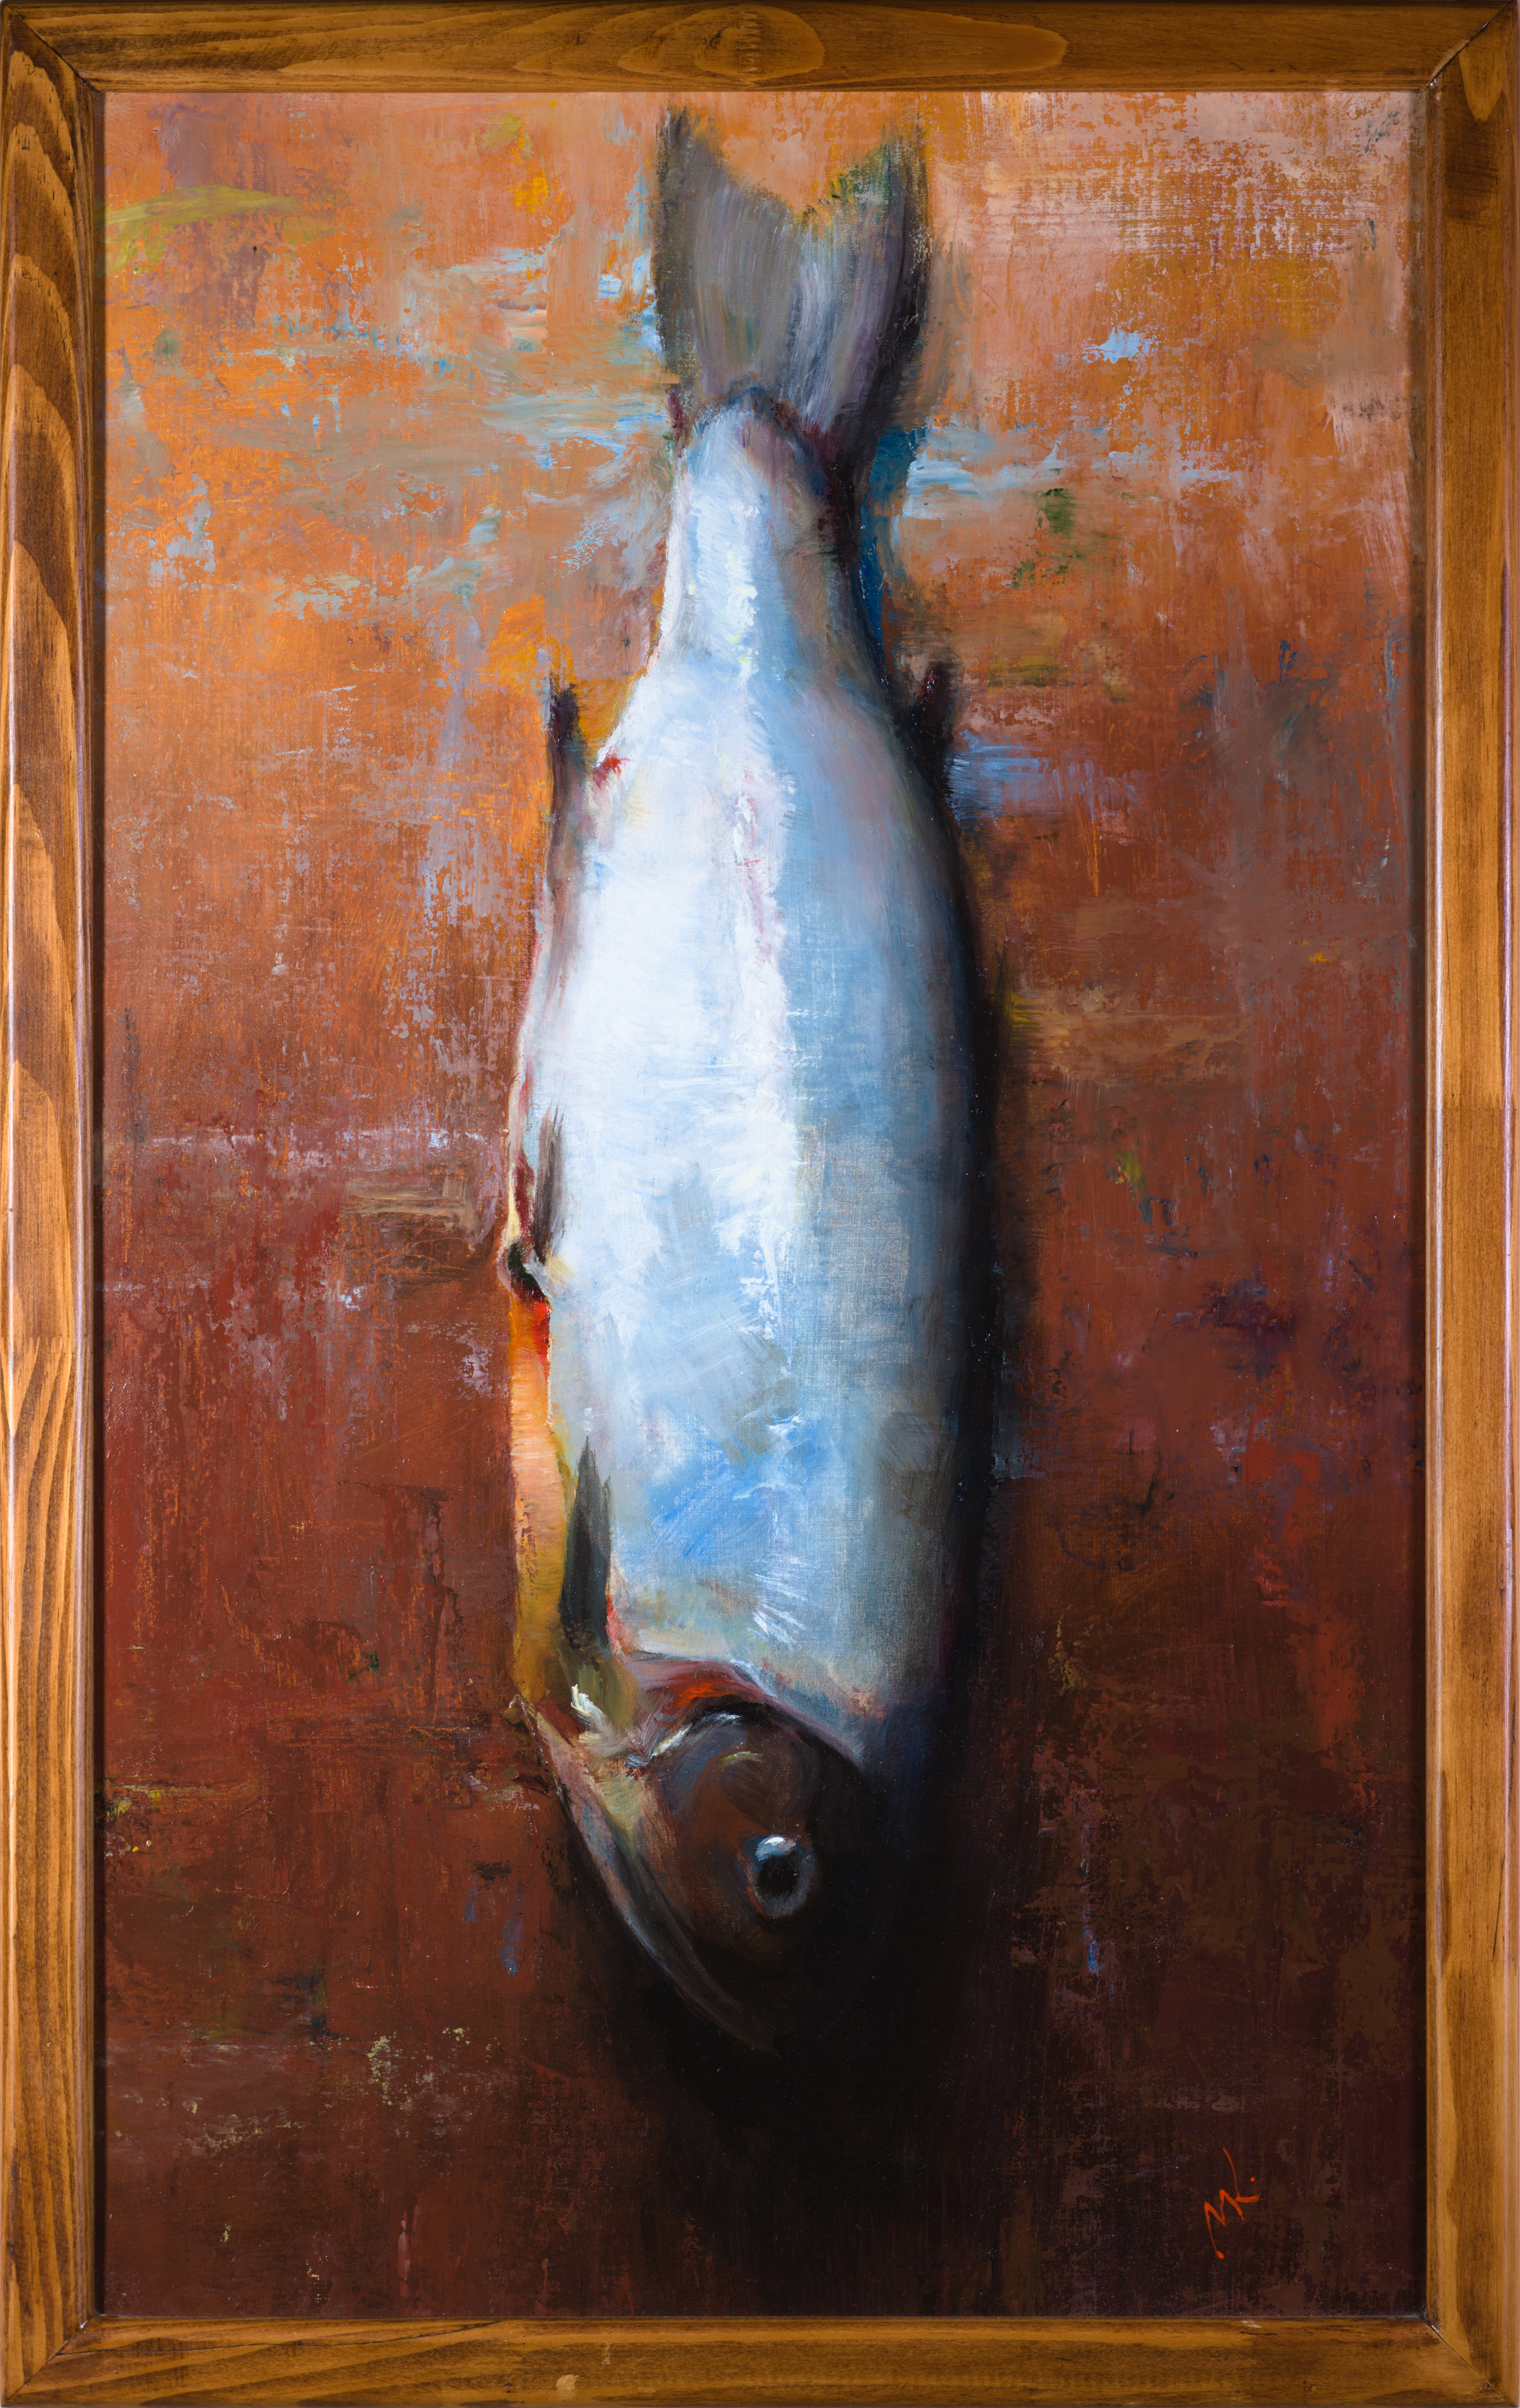 Mikhail Velavok; Sad Salty Fish, 2019, Original Painting Oil, 30 x 49 cm. Artwork description: 241 Original oil painting on canvas glued on cardboard.  The artwork is being sold framed in natural light wood frame 51. 5x32. 5cm.  Dimensions of artwork without a frame are 49x30cm.  It is wired and ready for hanging.  fish, salty fish, dried fish, dead fish, object, still life, ...